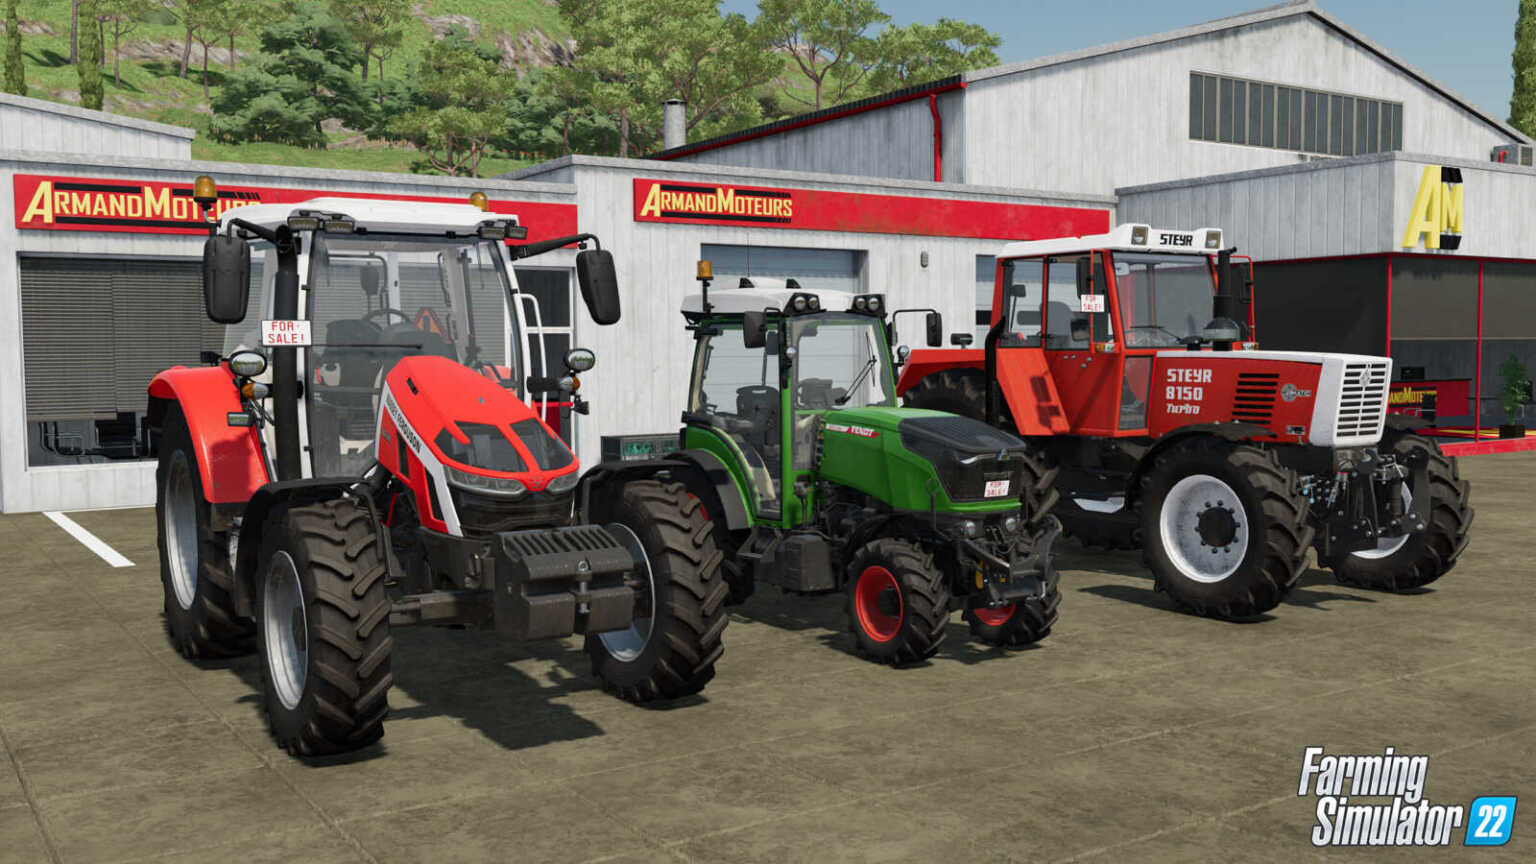 Just to tell you about Farming Simulator 22: A review that is not a review